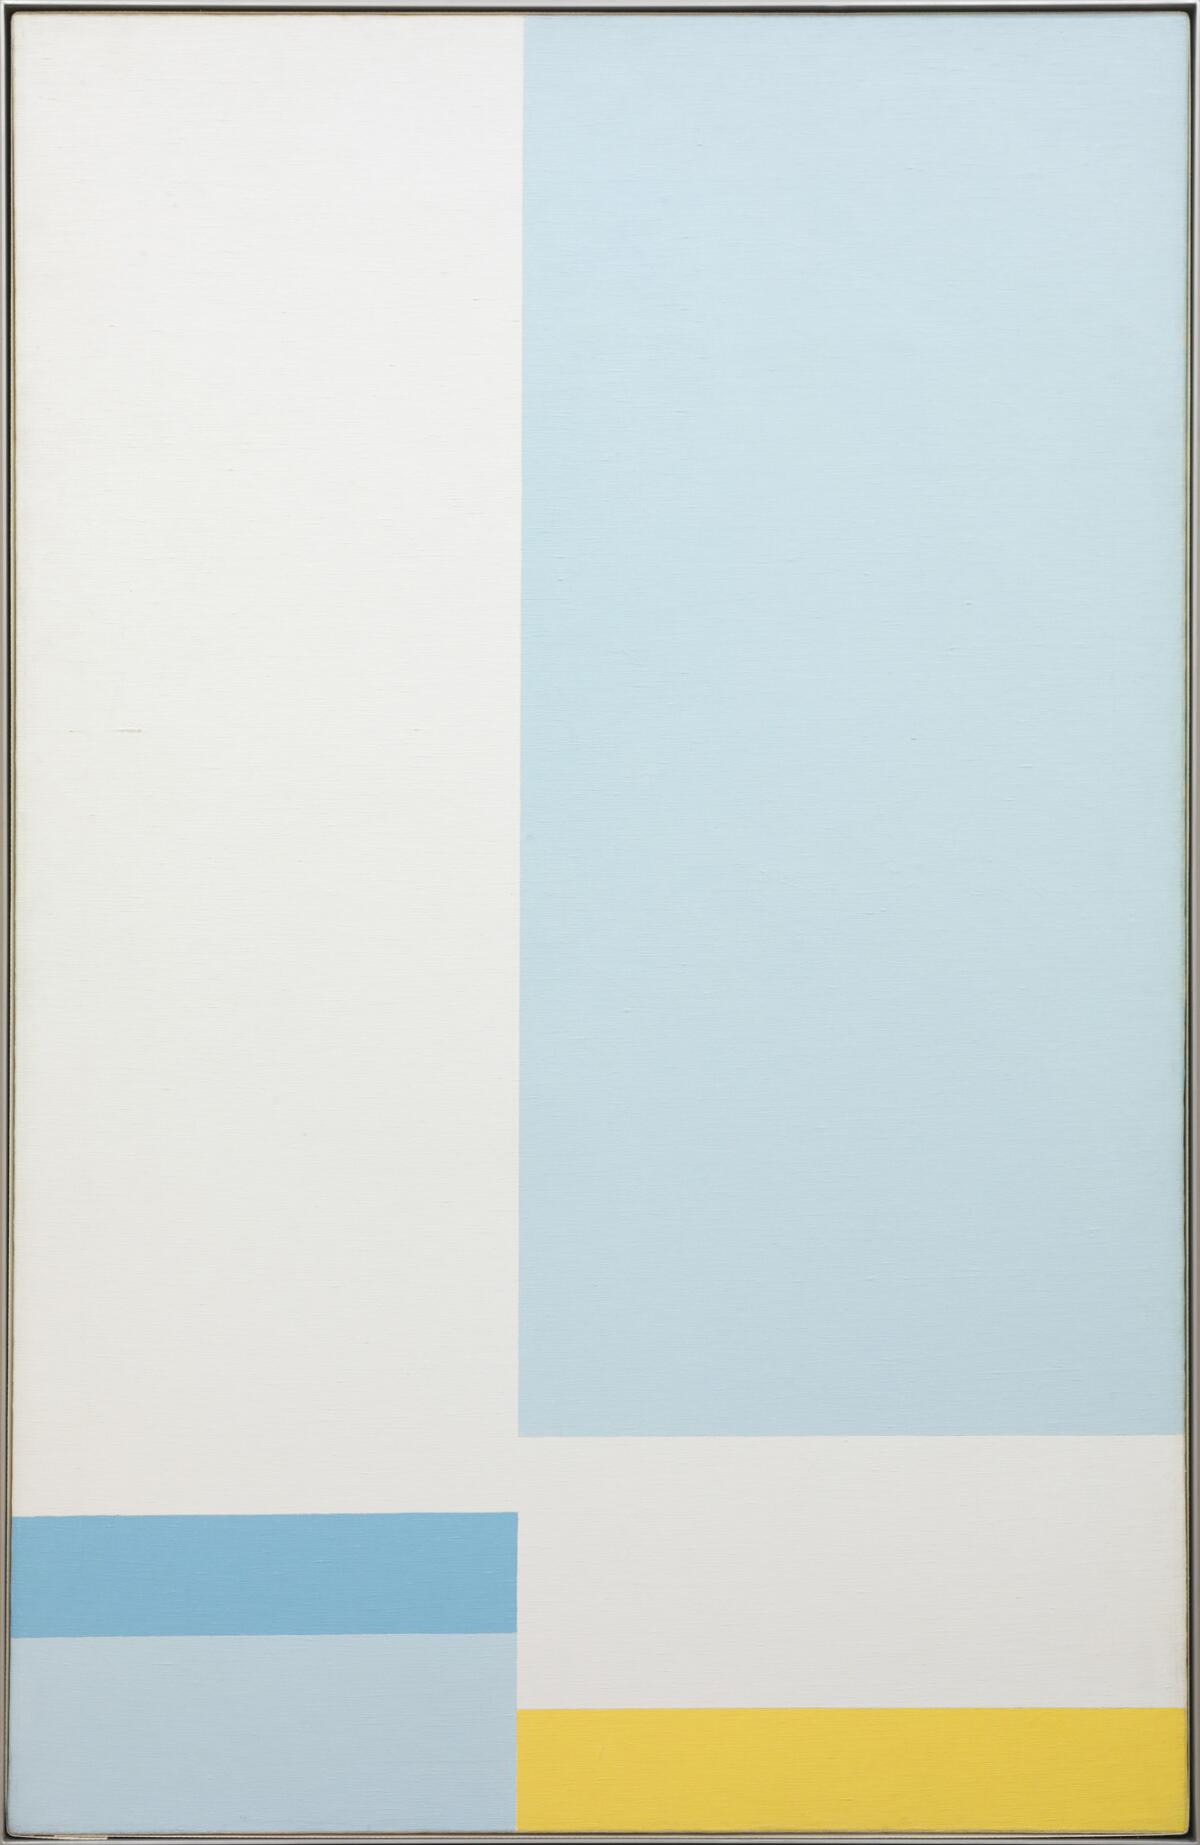 John McLaughlin, "#15-1958," 1958. Oil on canvas, 60 inches by 38 inches